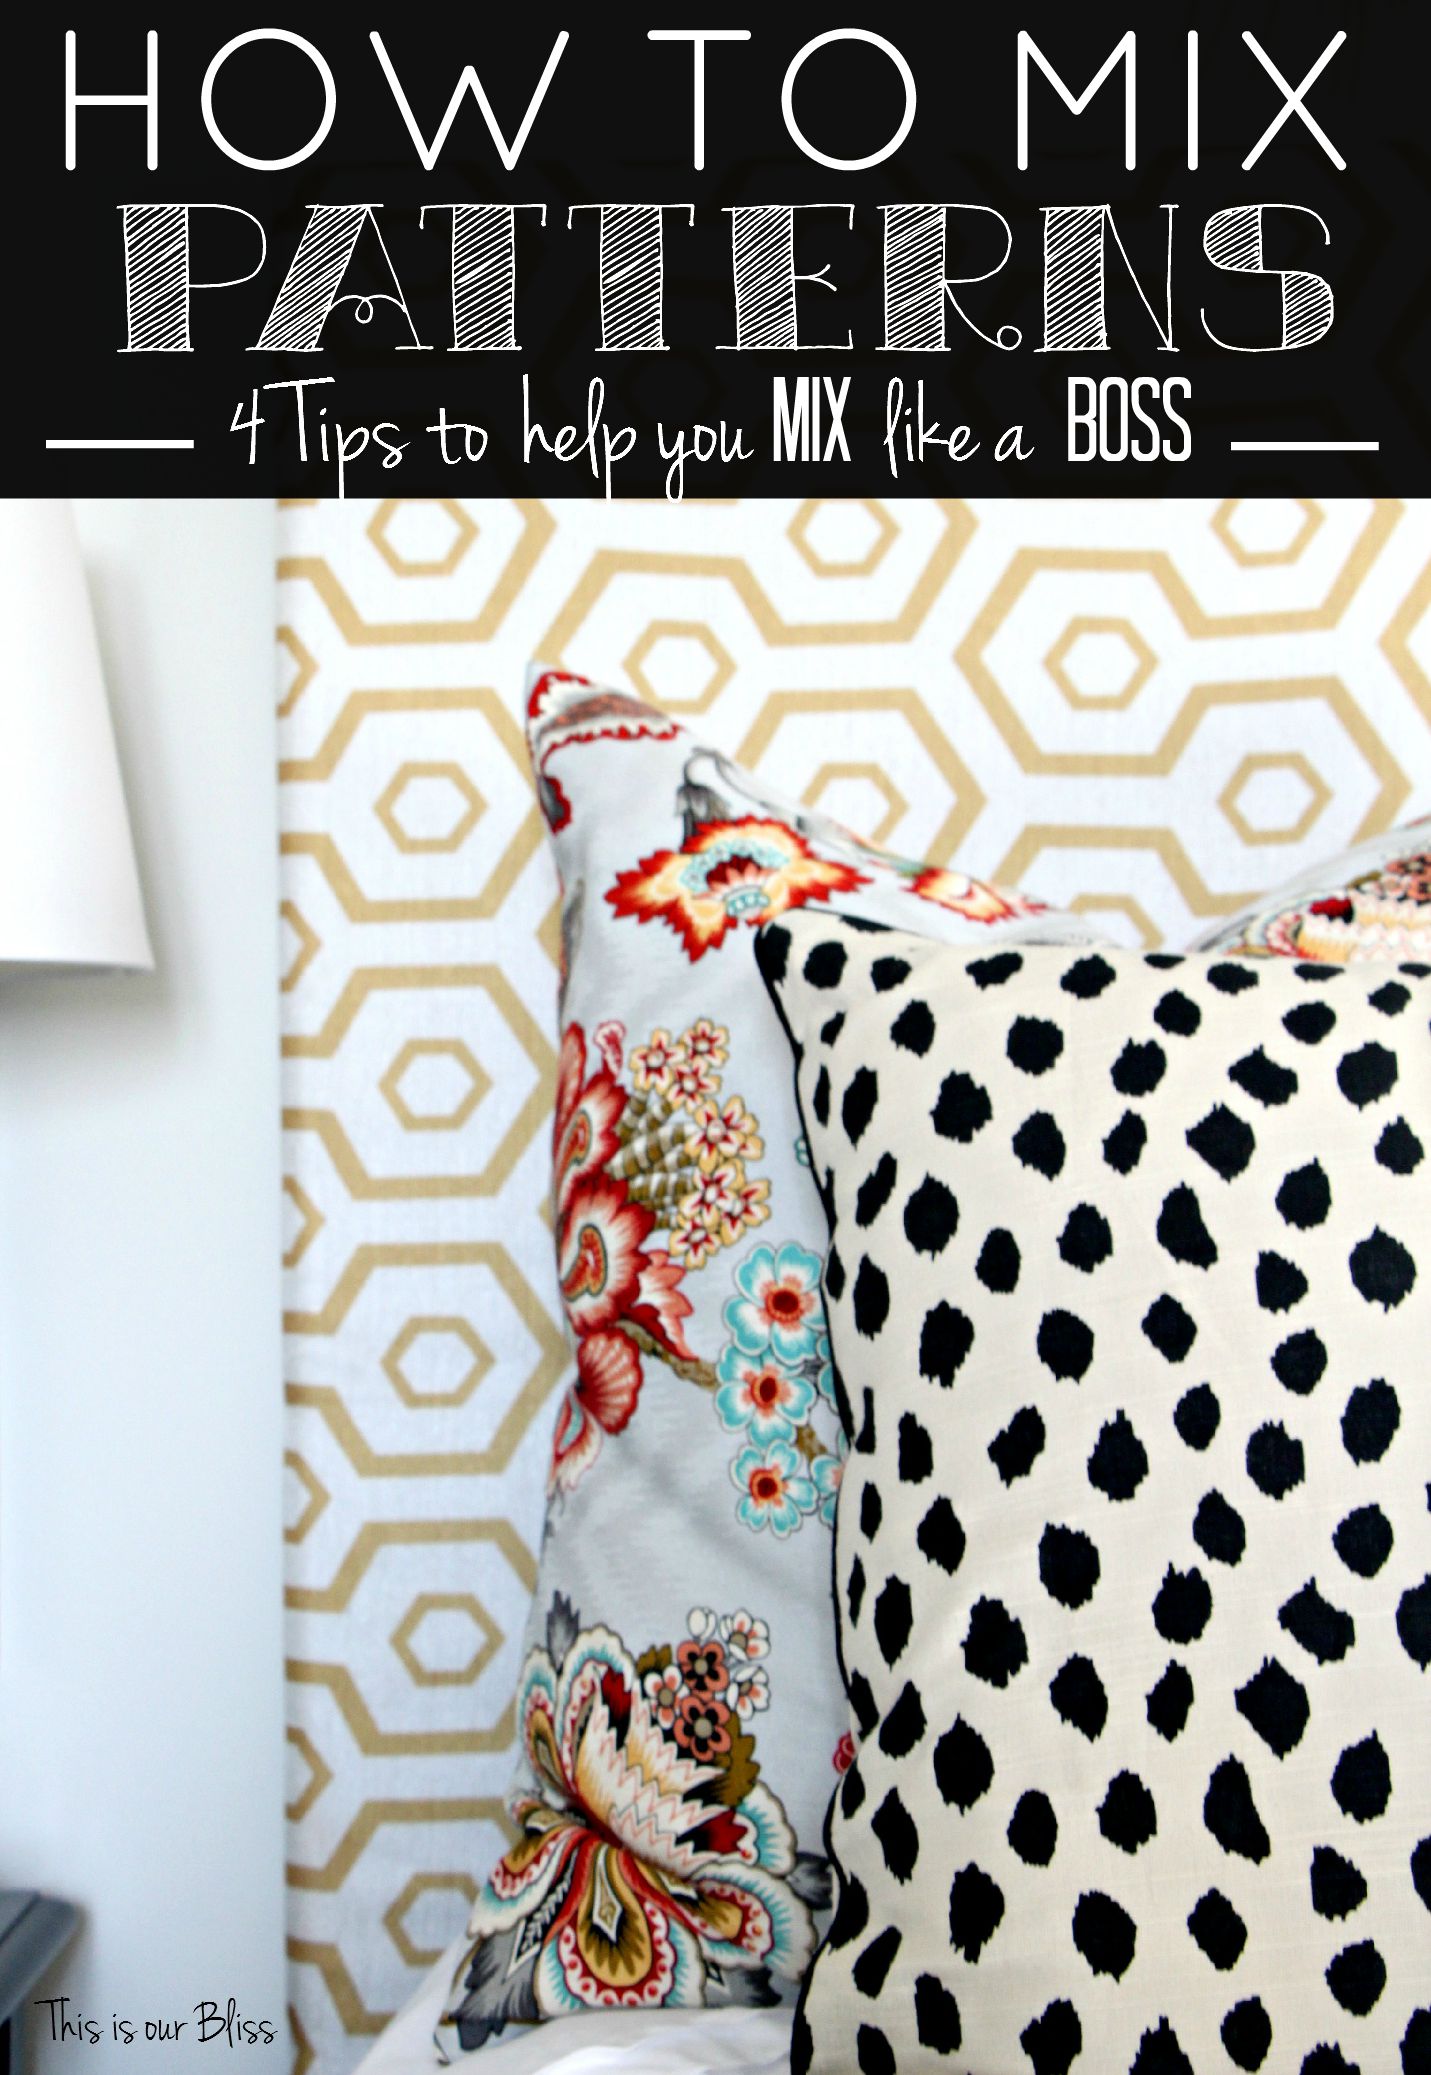 How to mix patterns - mixing patterns - mix like a boss - back to basics - pattern play - This is our Bliss